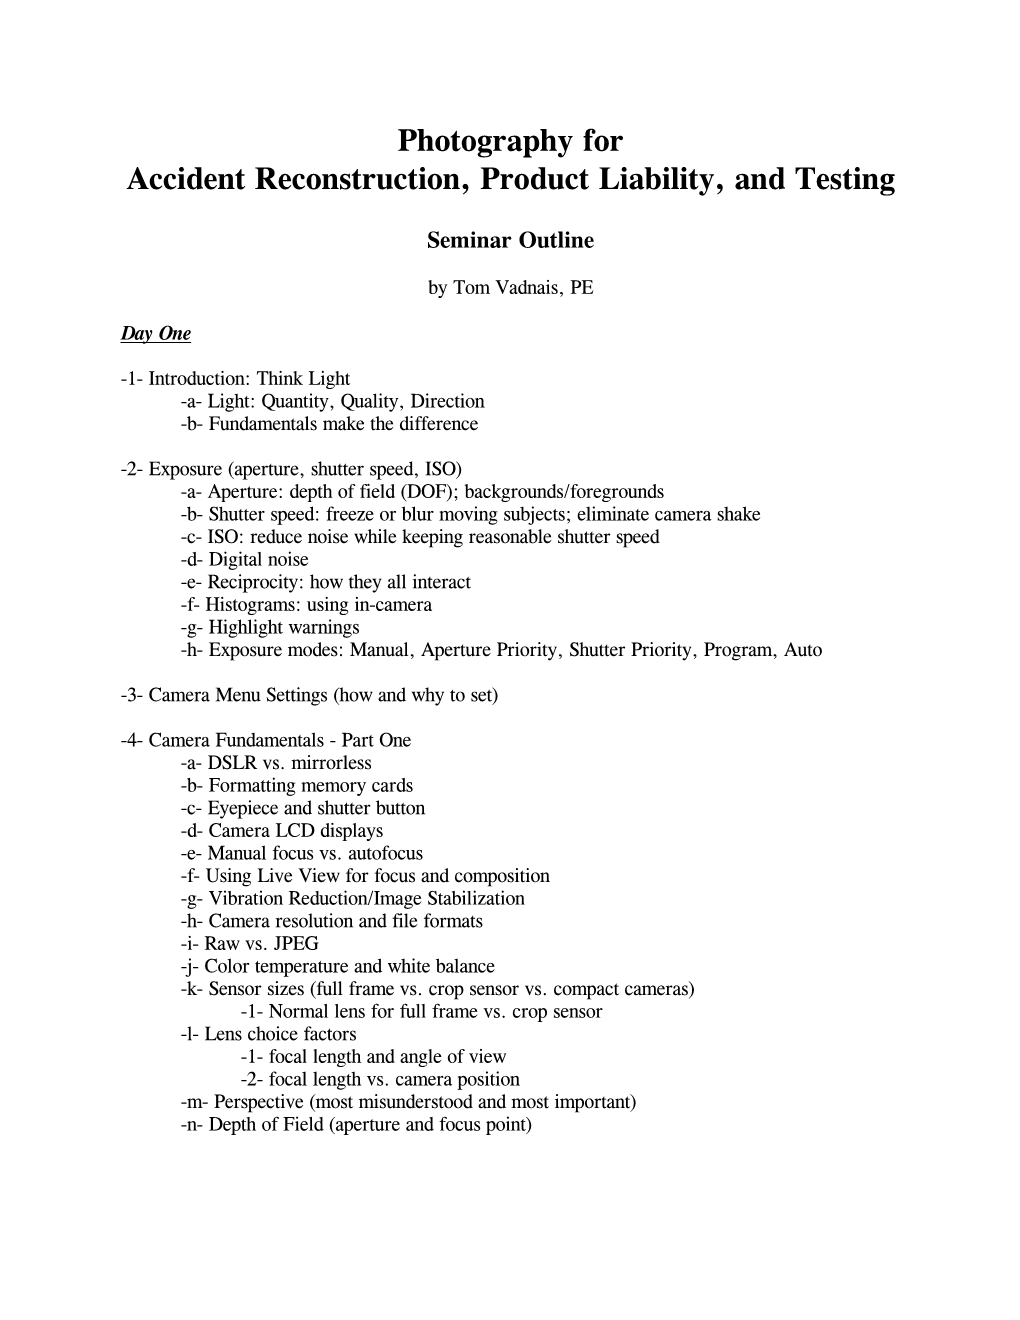 Photography for Accident Reconstruction, Product Liability, and Testing